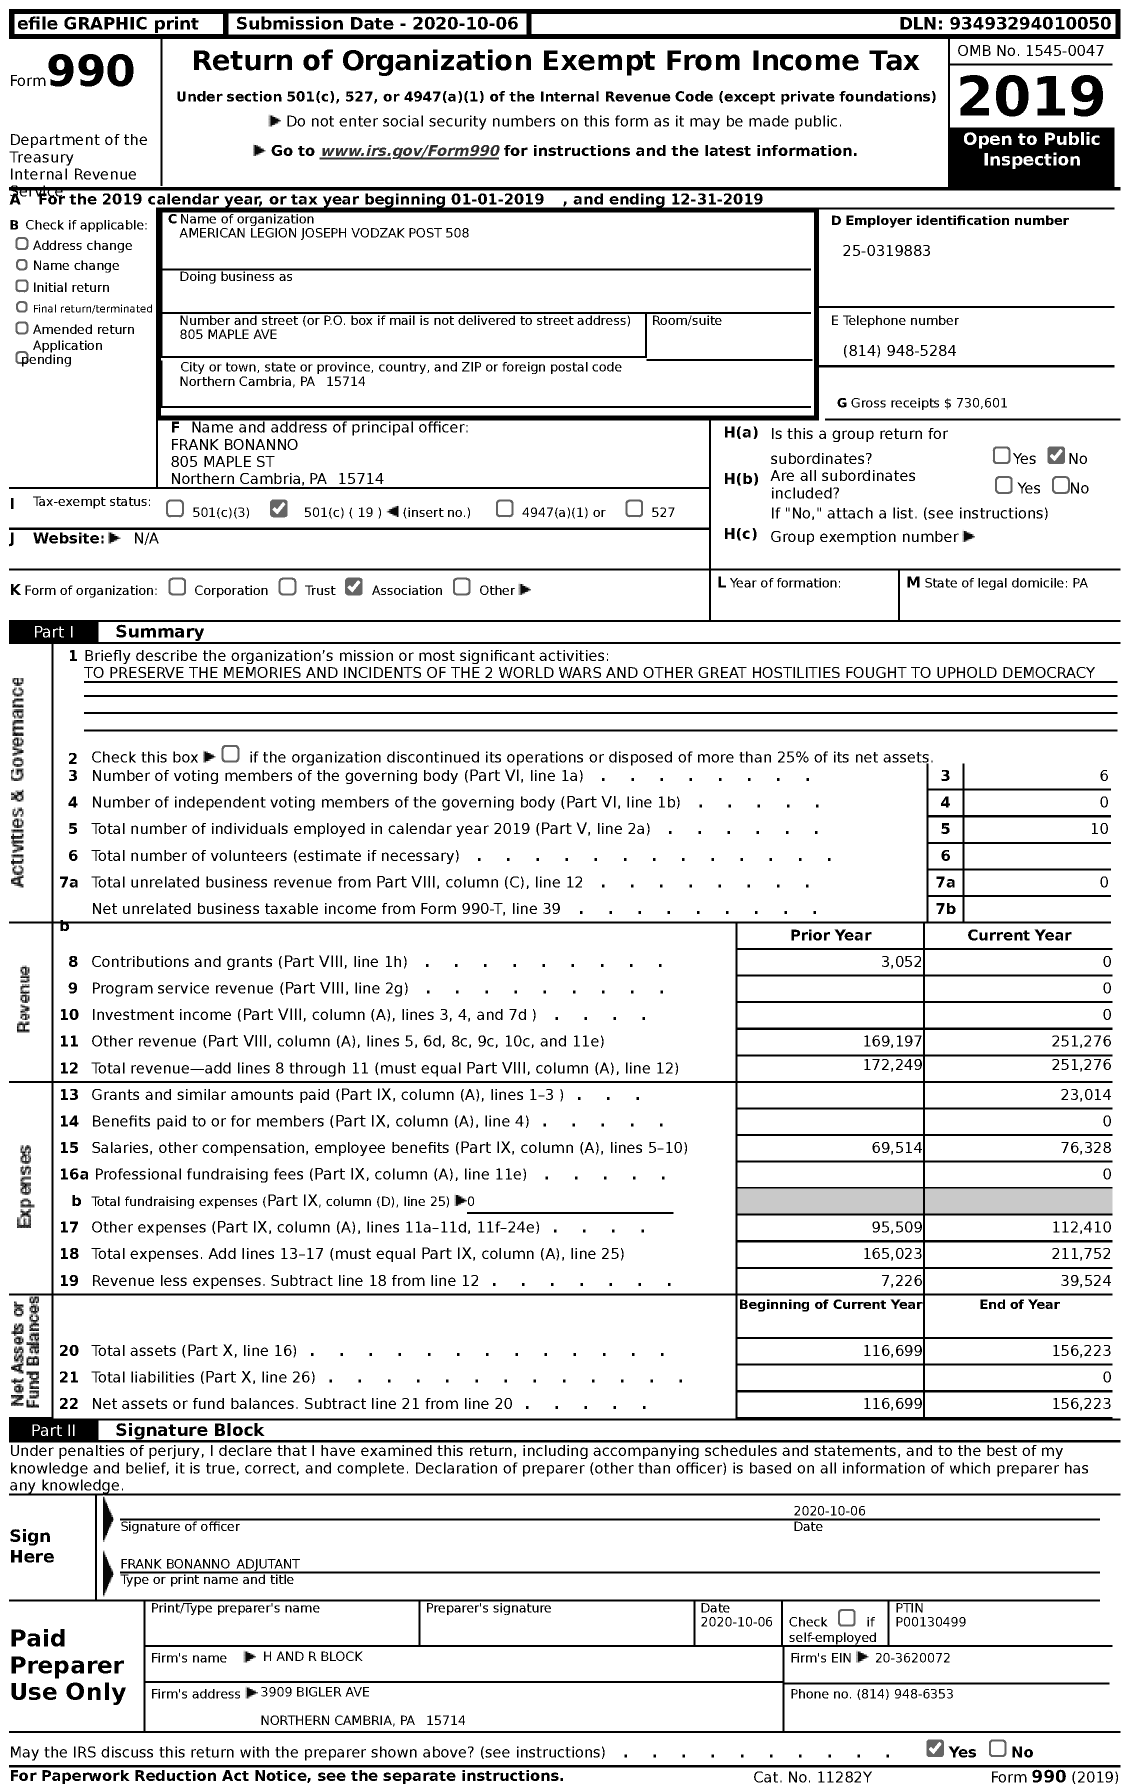 Image of first page of 2019 Form 990 for American Legion - 508 Joseph Vodzak